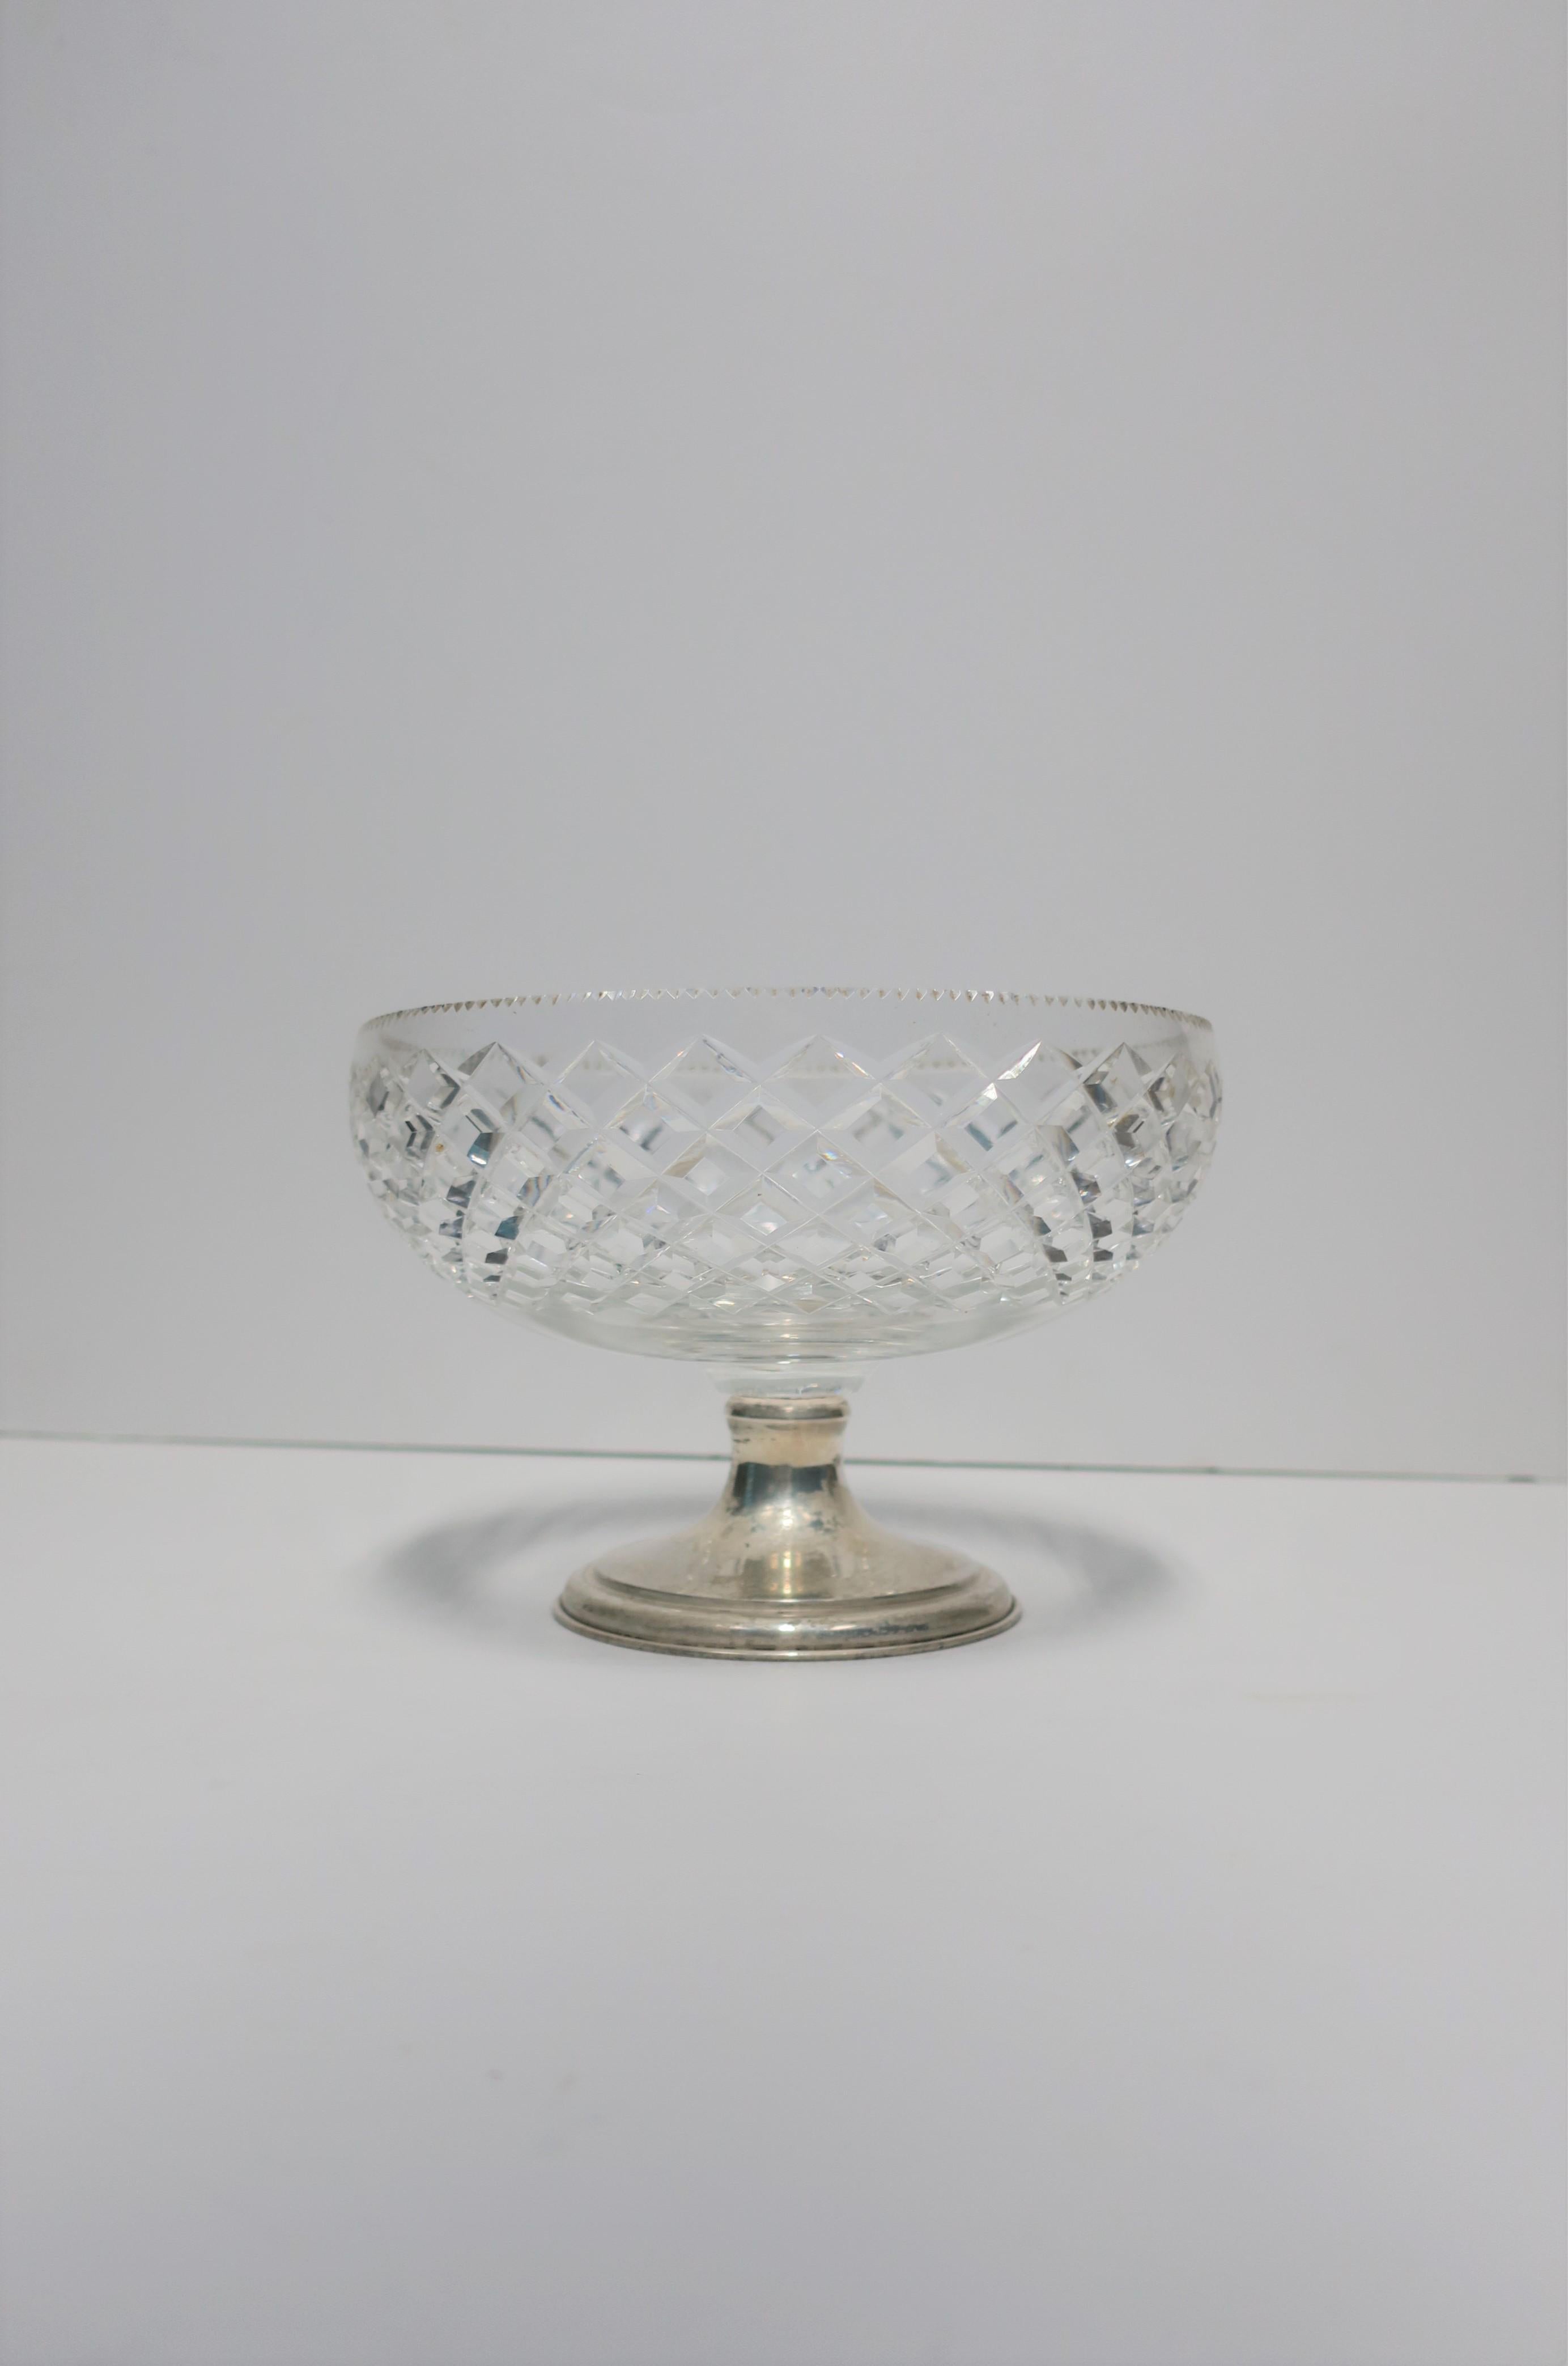 Sterling Silver and Crystal Compote or Footed Bowl by T. G. Hawkes & Co. For Sale 1